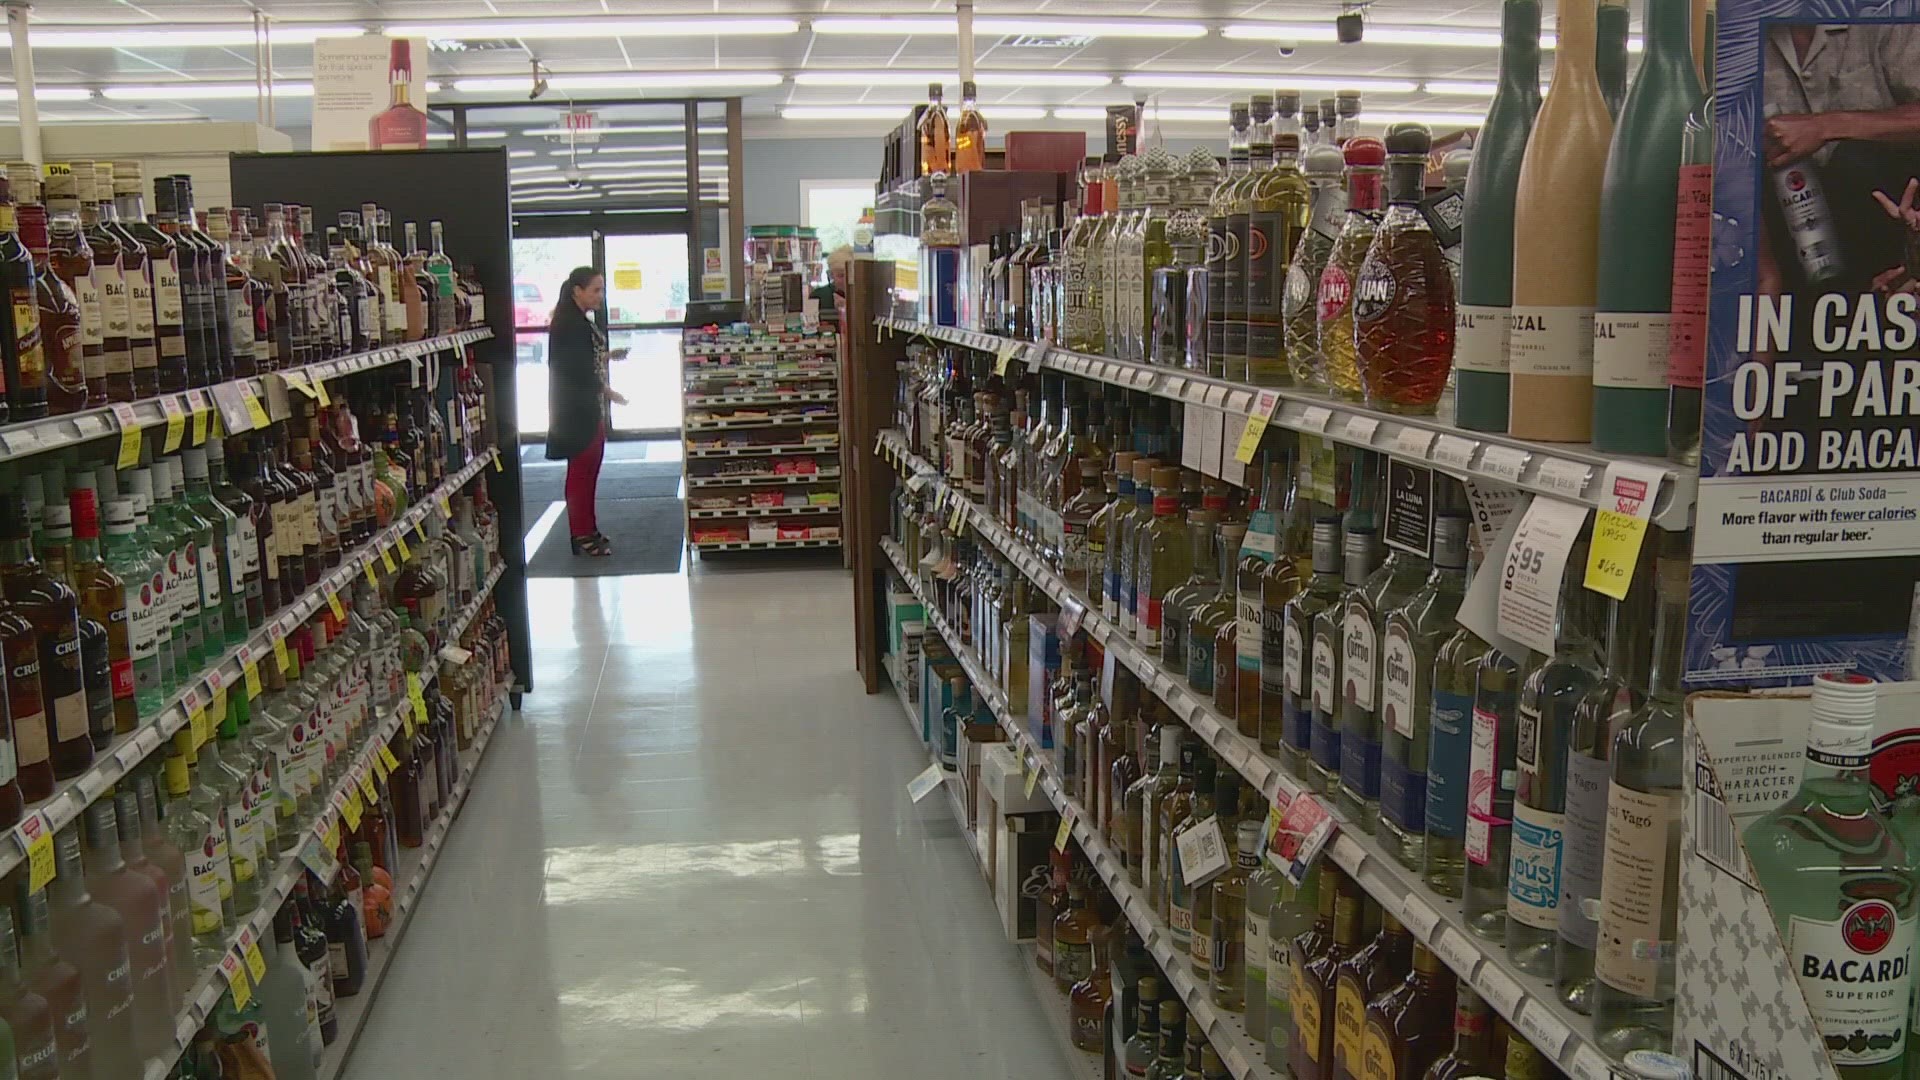 Alcohol cannot be purchased on Sundays before 1 p.m., but a new proposal would extend sales around certain holidays.